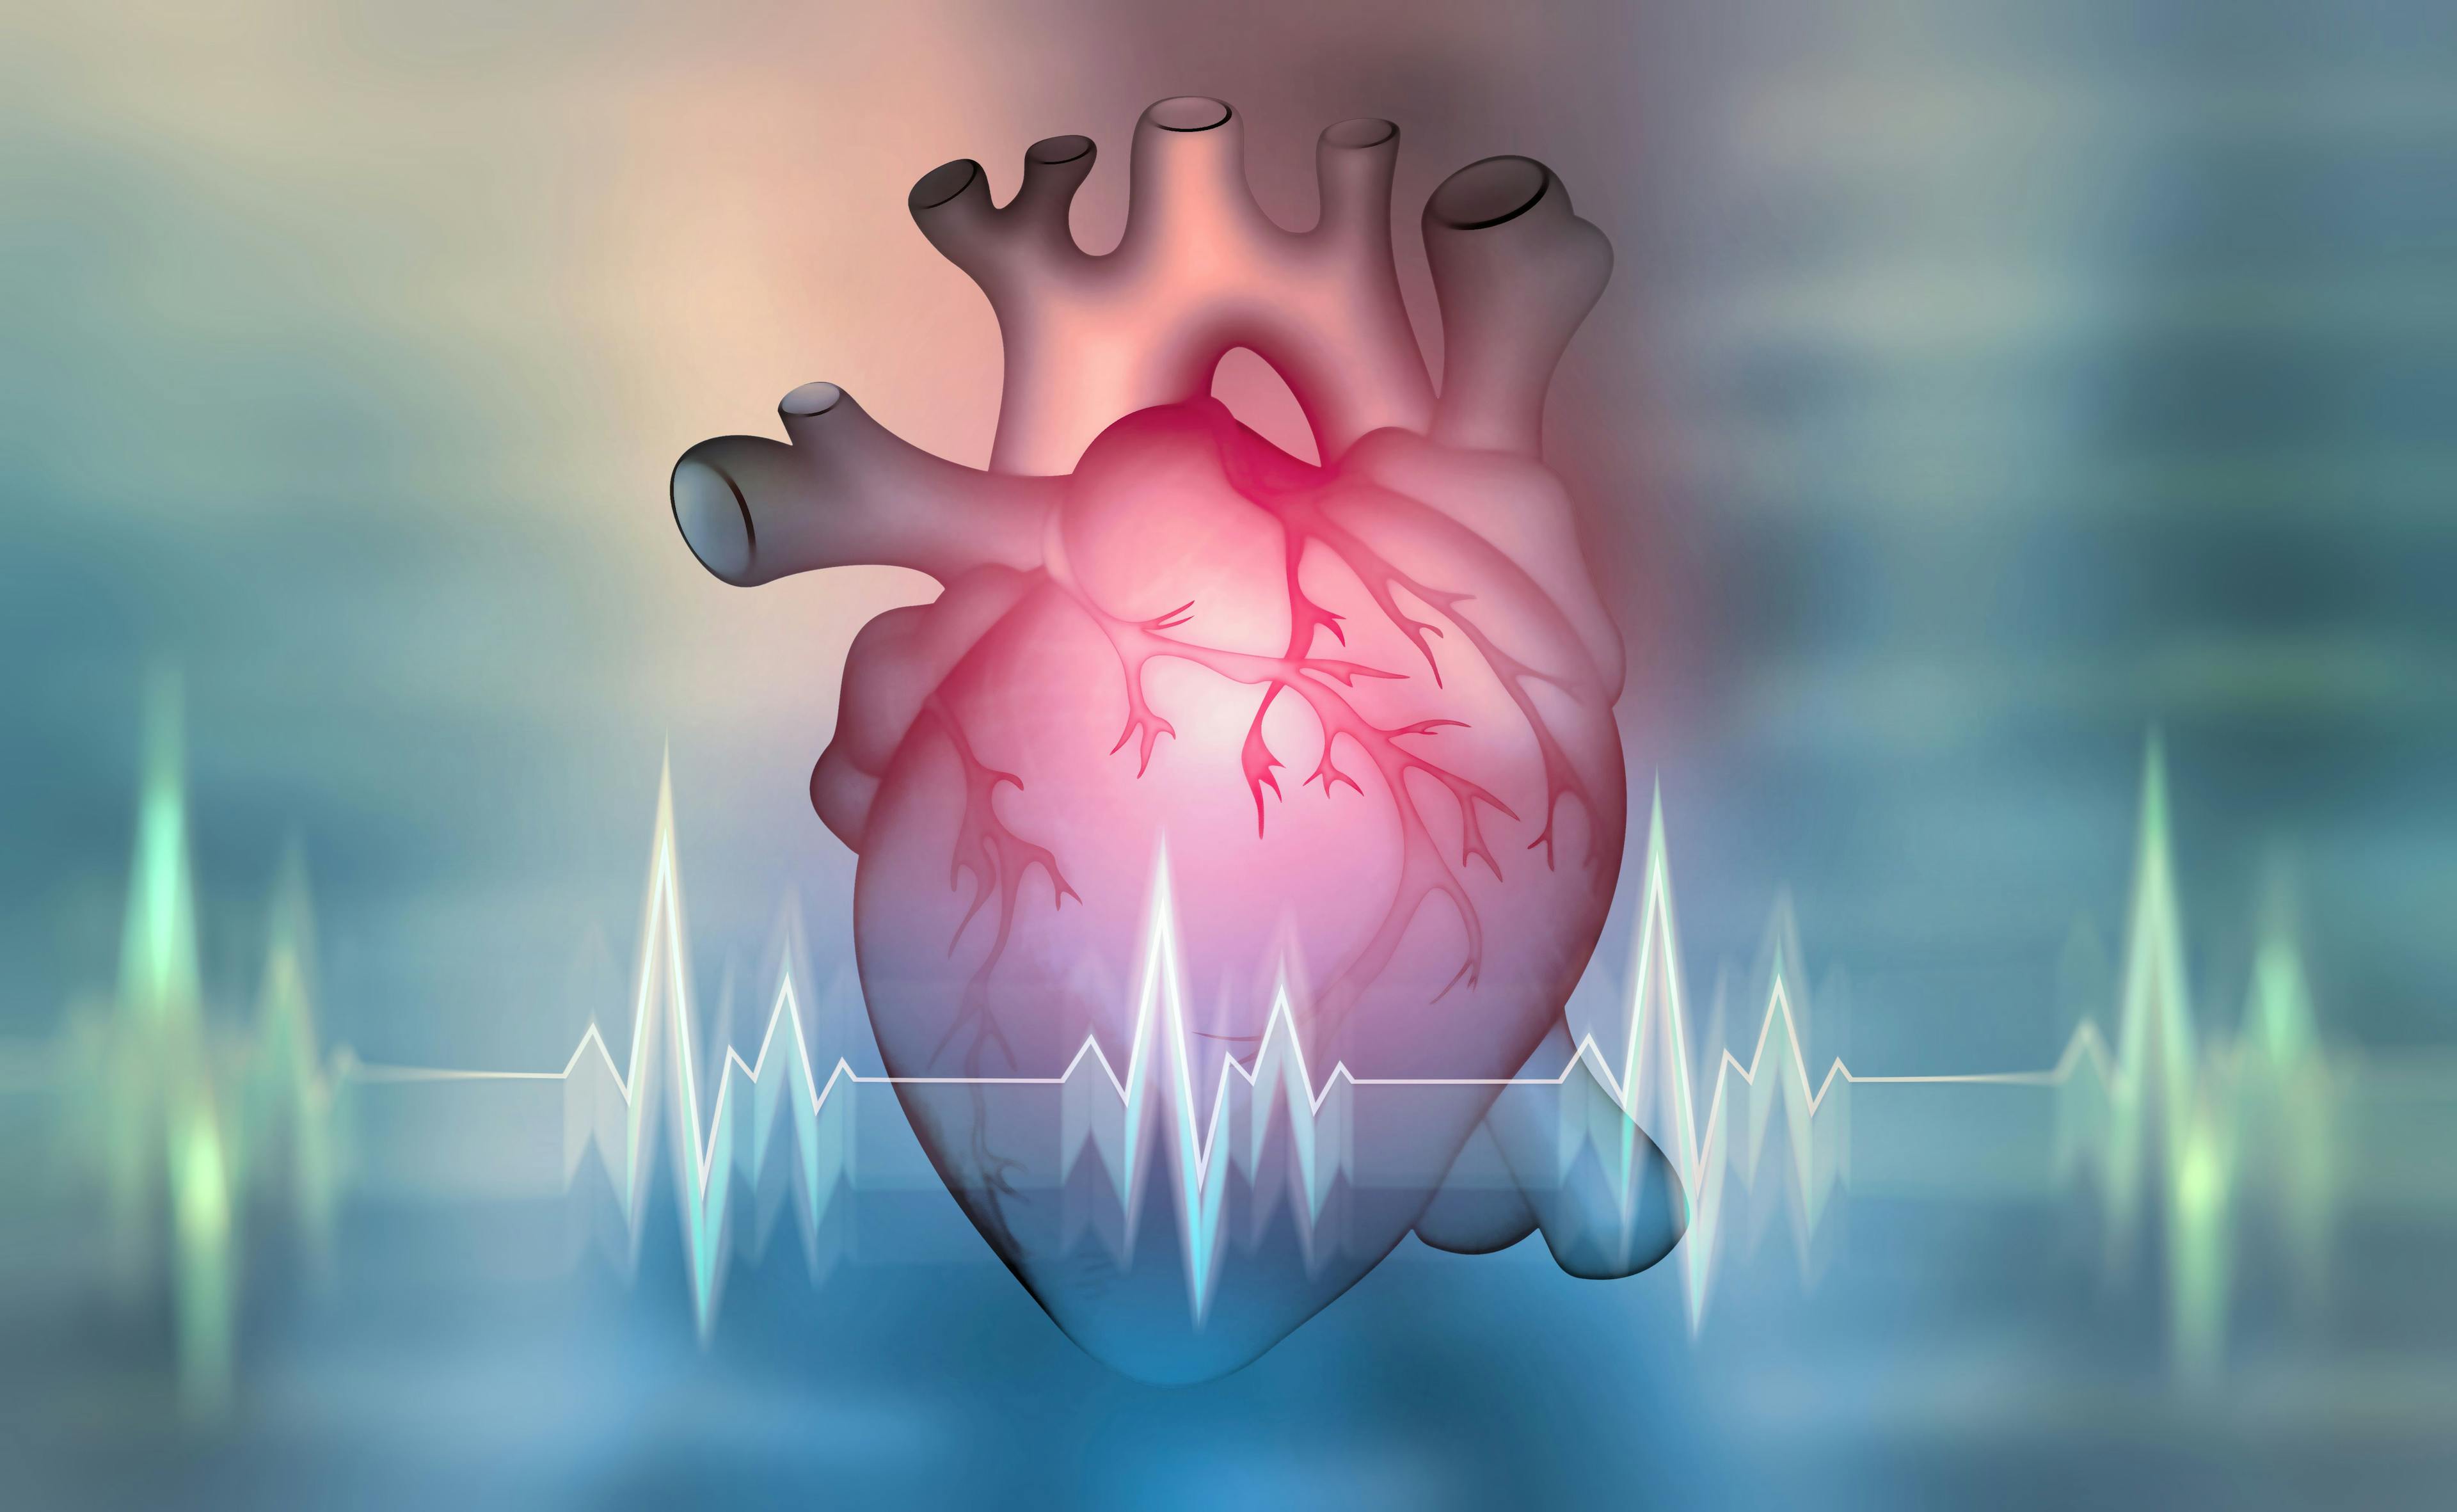 Heart Pump may Expand Treatment Options for Elderly with Heart Failure